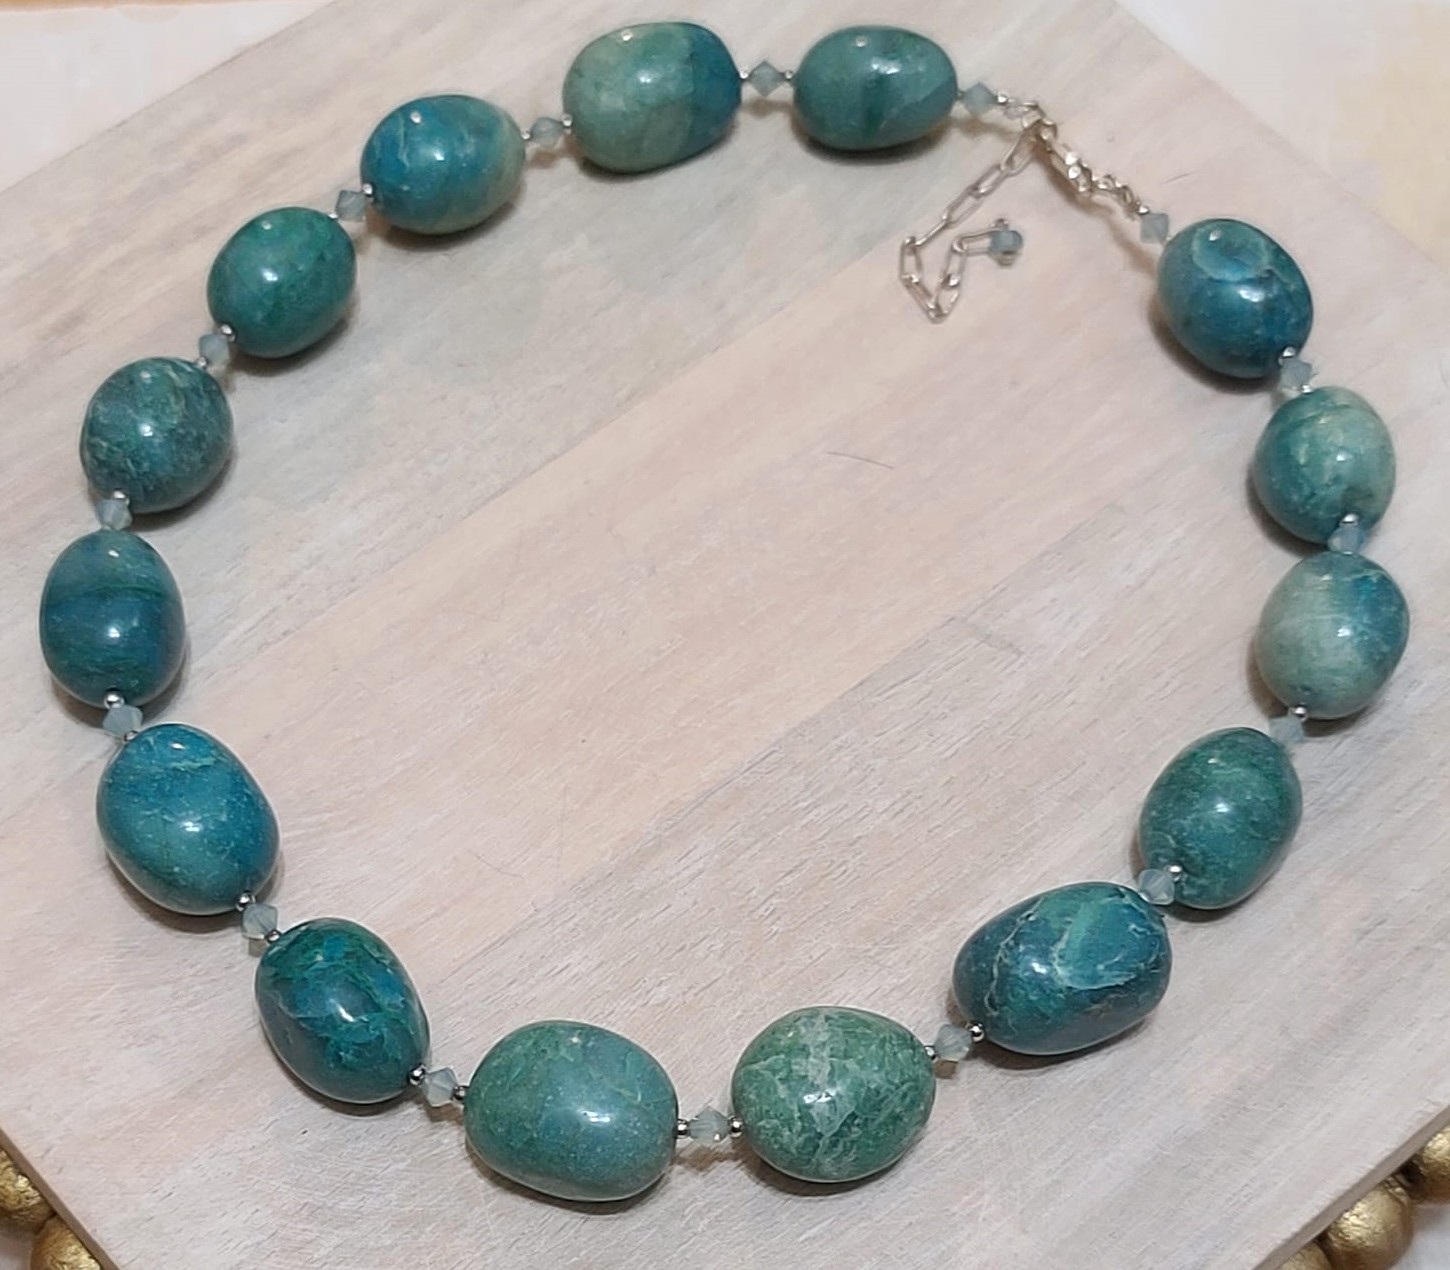 Chrysocolla Gemstone and Crystal Necklace w/Sterling Silver